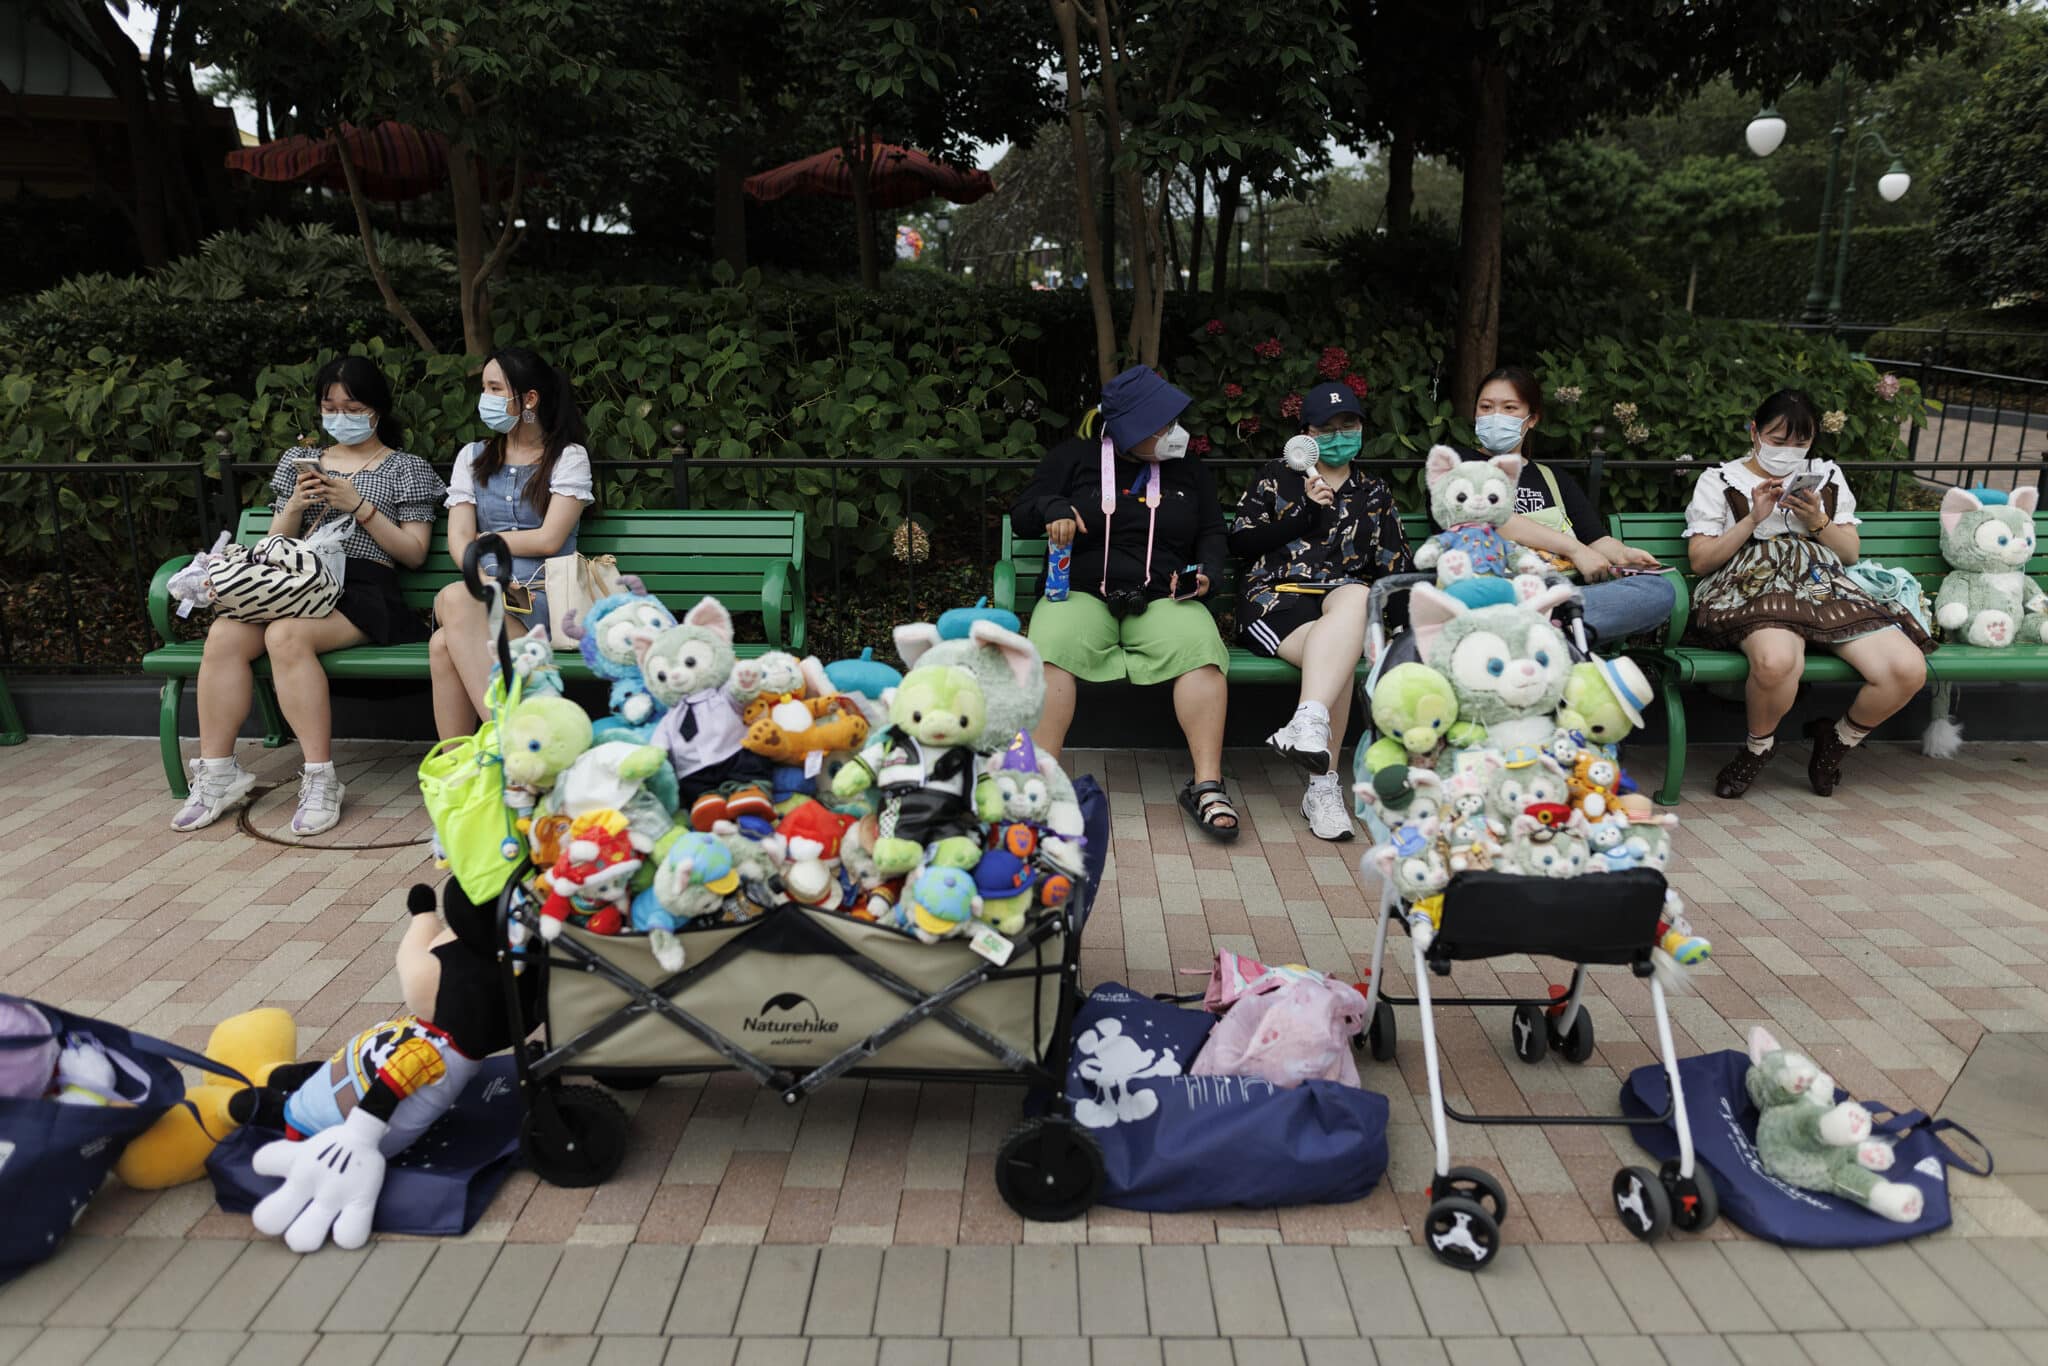 SHANGHAI, CHINA - JUNE 30: People rest behind carts of character plushies at Shanghai Disneyland on June 30, 2022 in Shanghai, China. (Photo by Hu Chengwei/Getty Images)